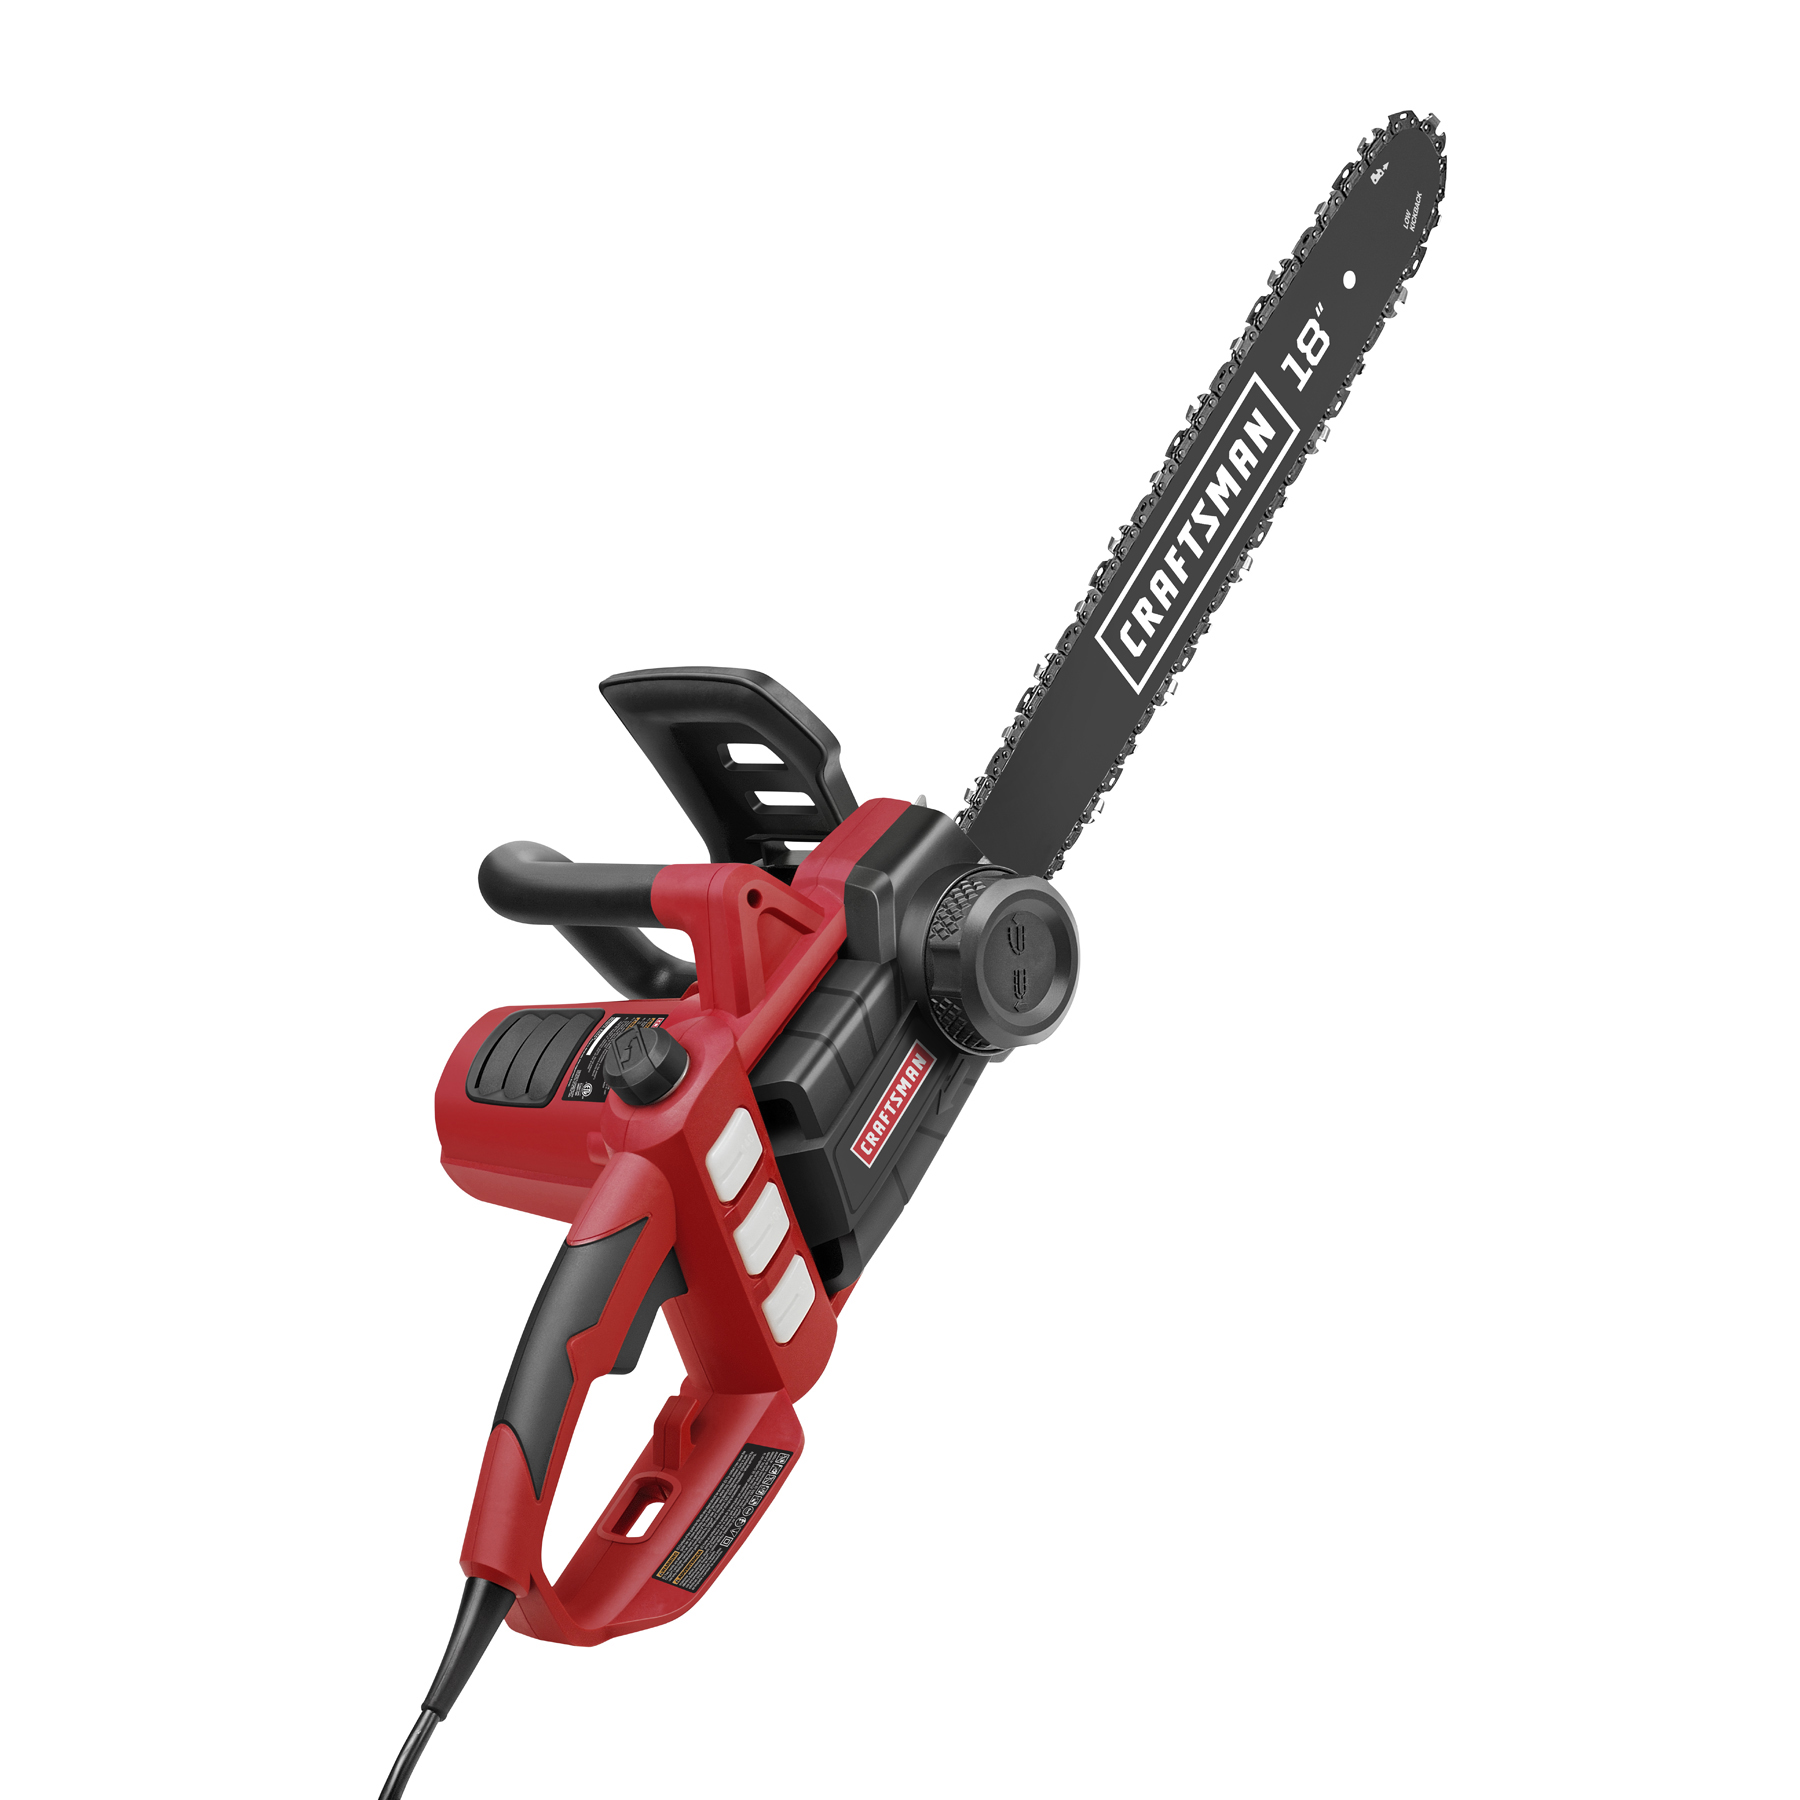 Craftsman 34120 18" Electric Corded Chainsaw
